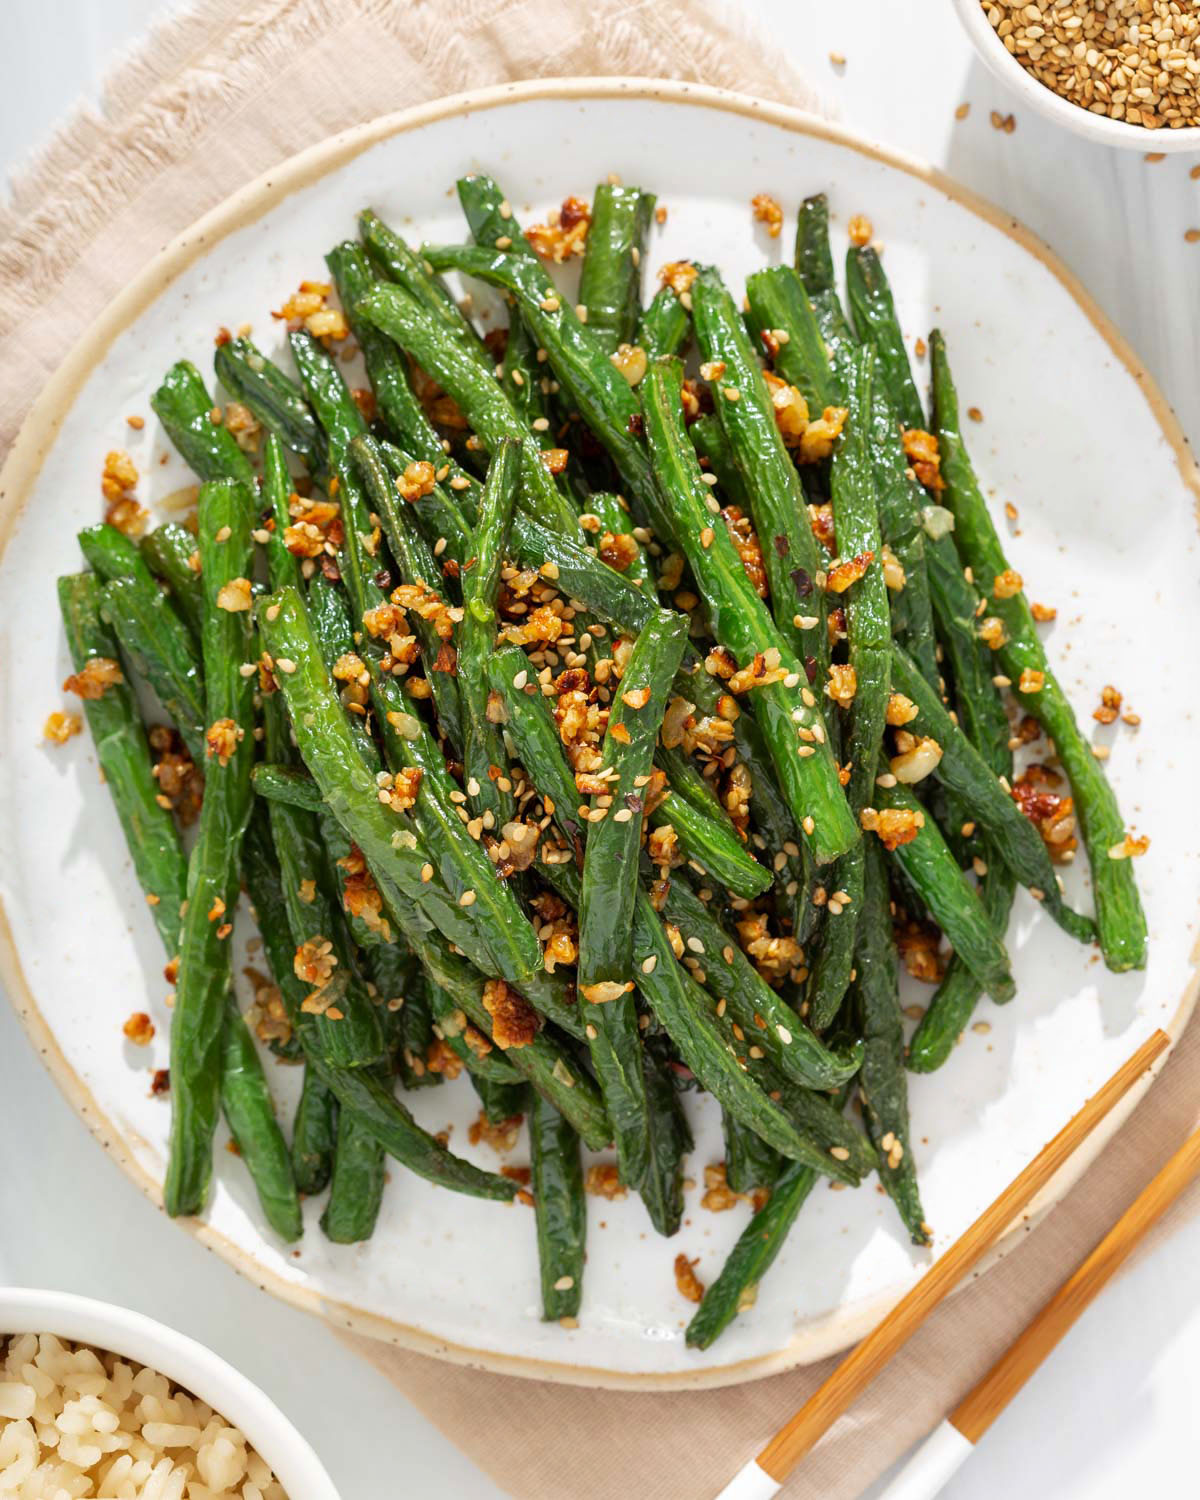 Looking down A plate of garlic green beans with rice and sesame seeds nearby